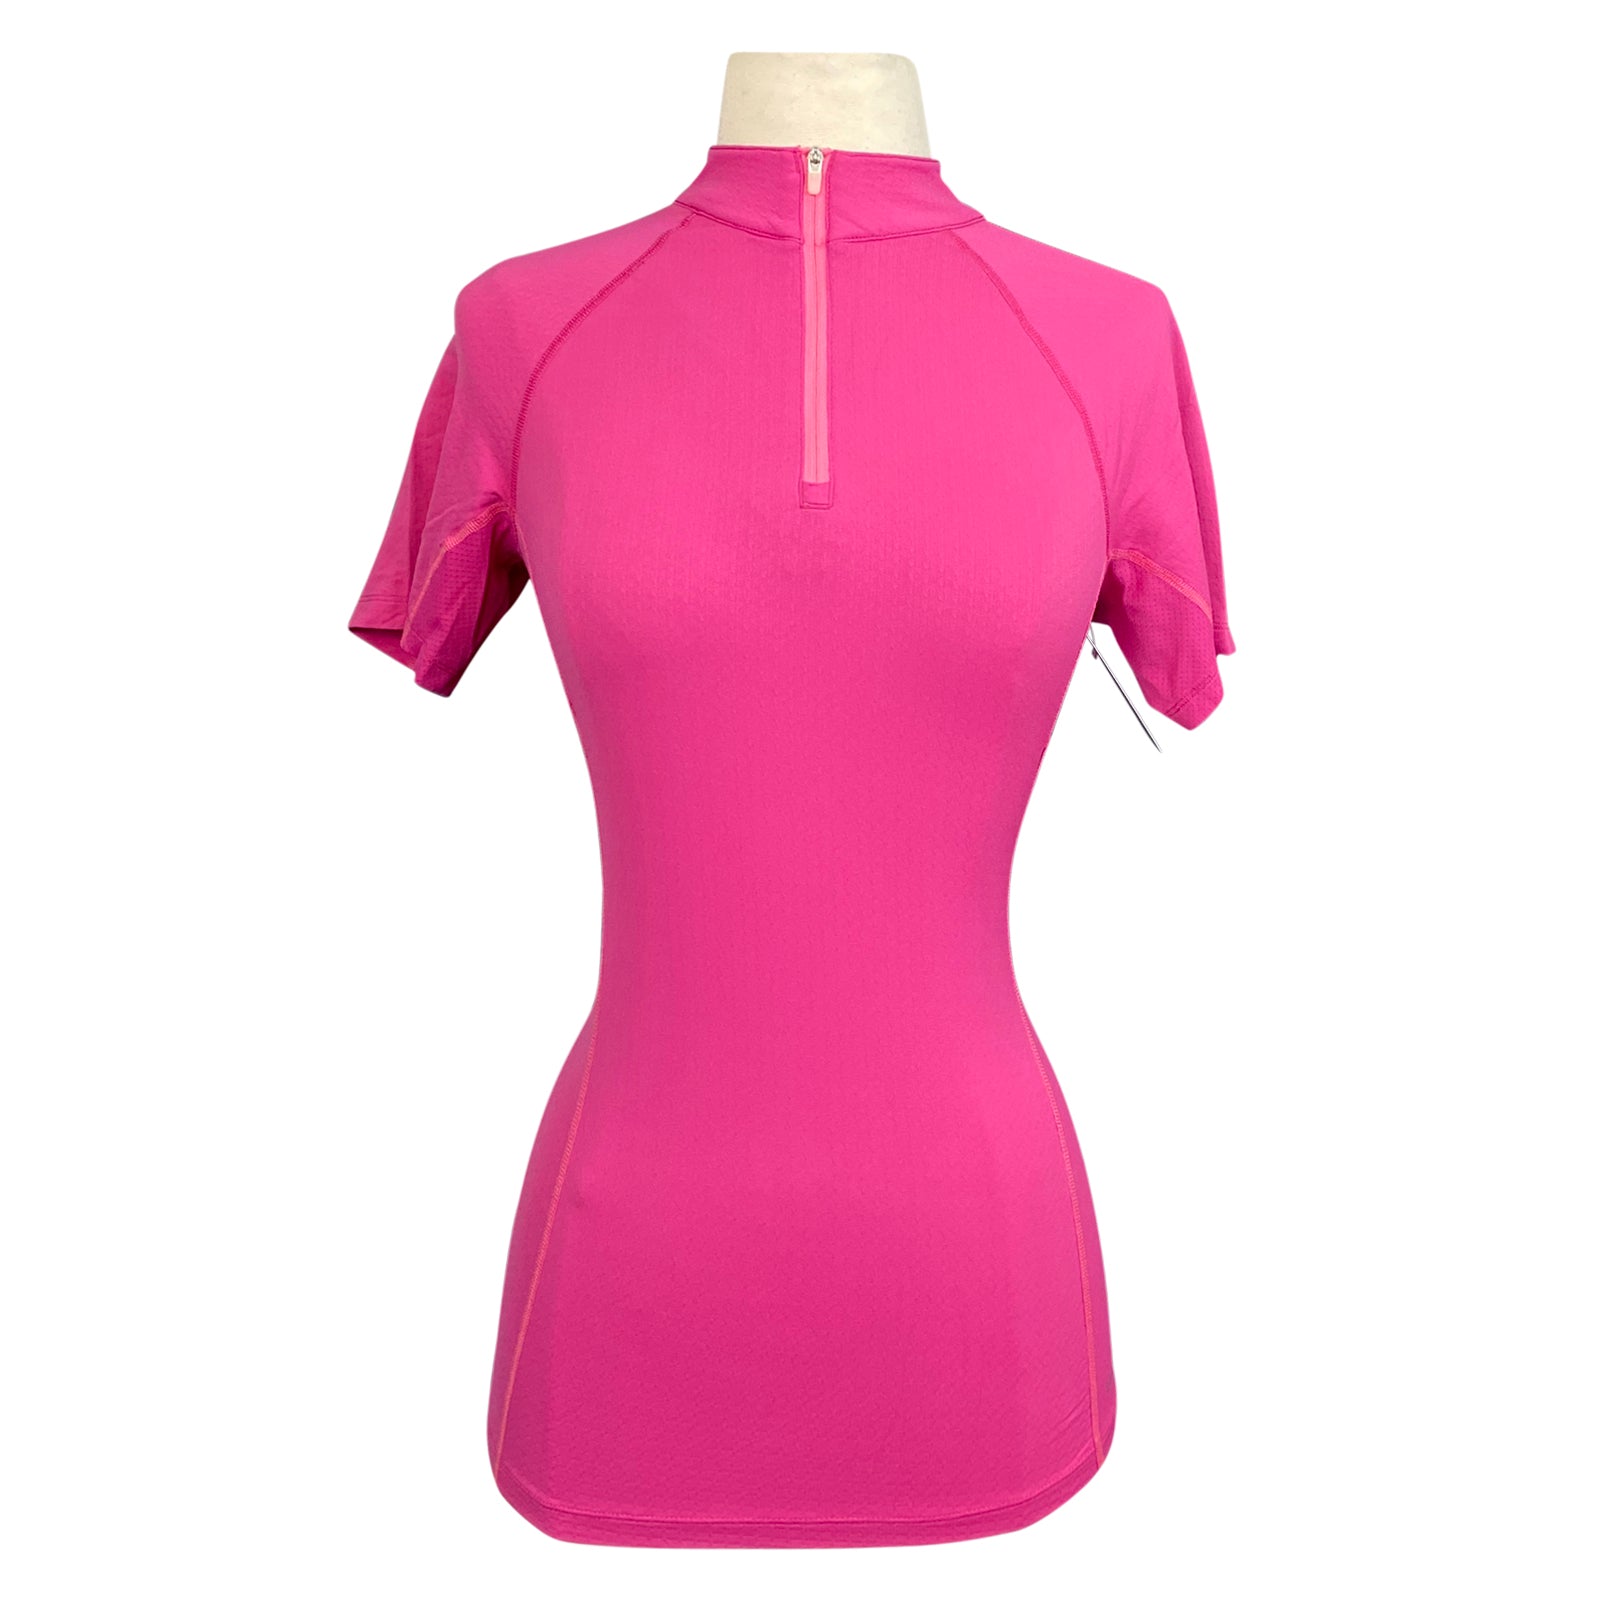 Noble Outfitters 'Ashley' Performance Short Sleeve in Hot Pink